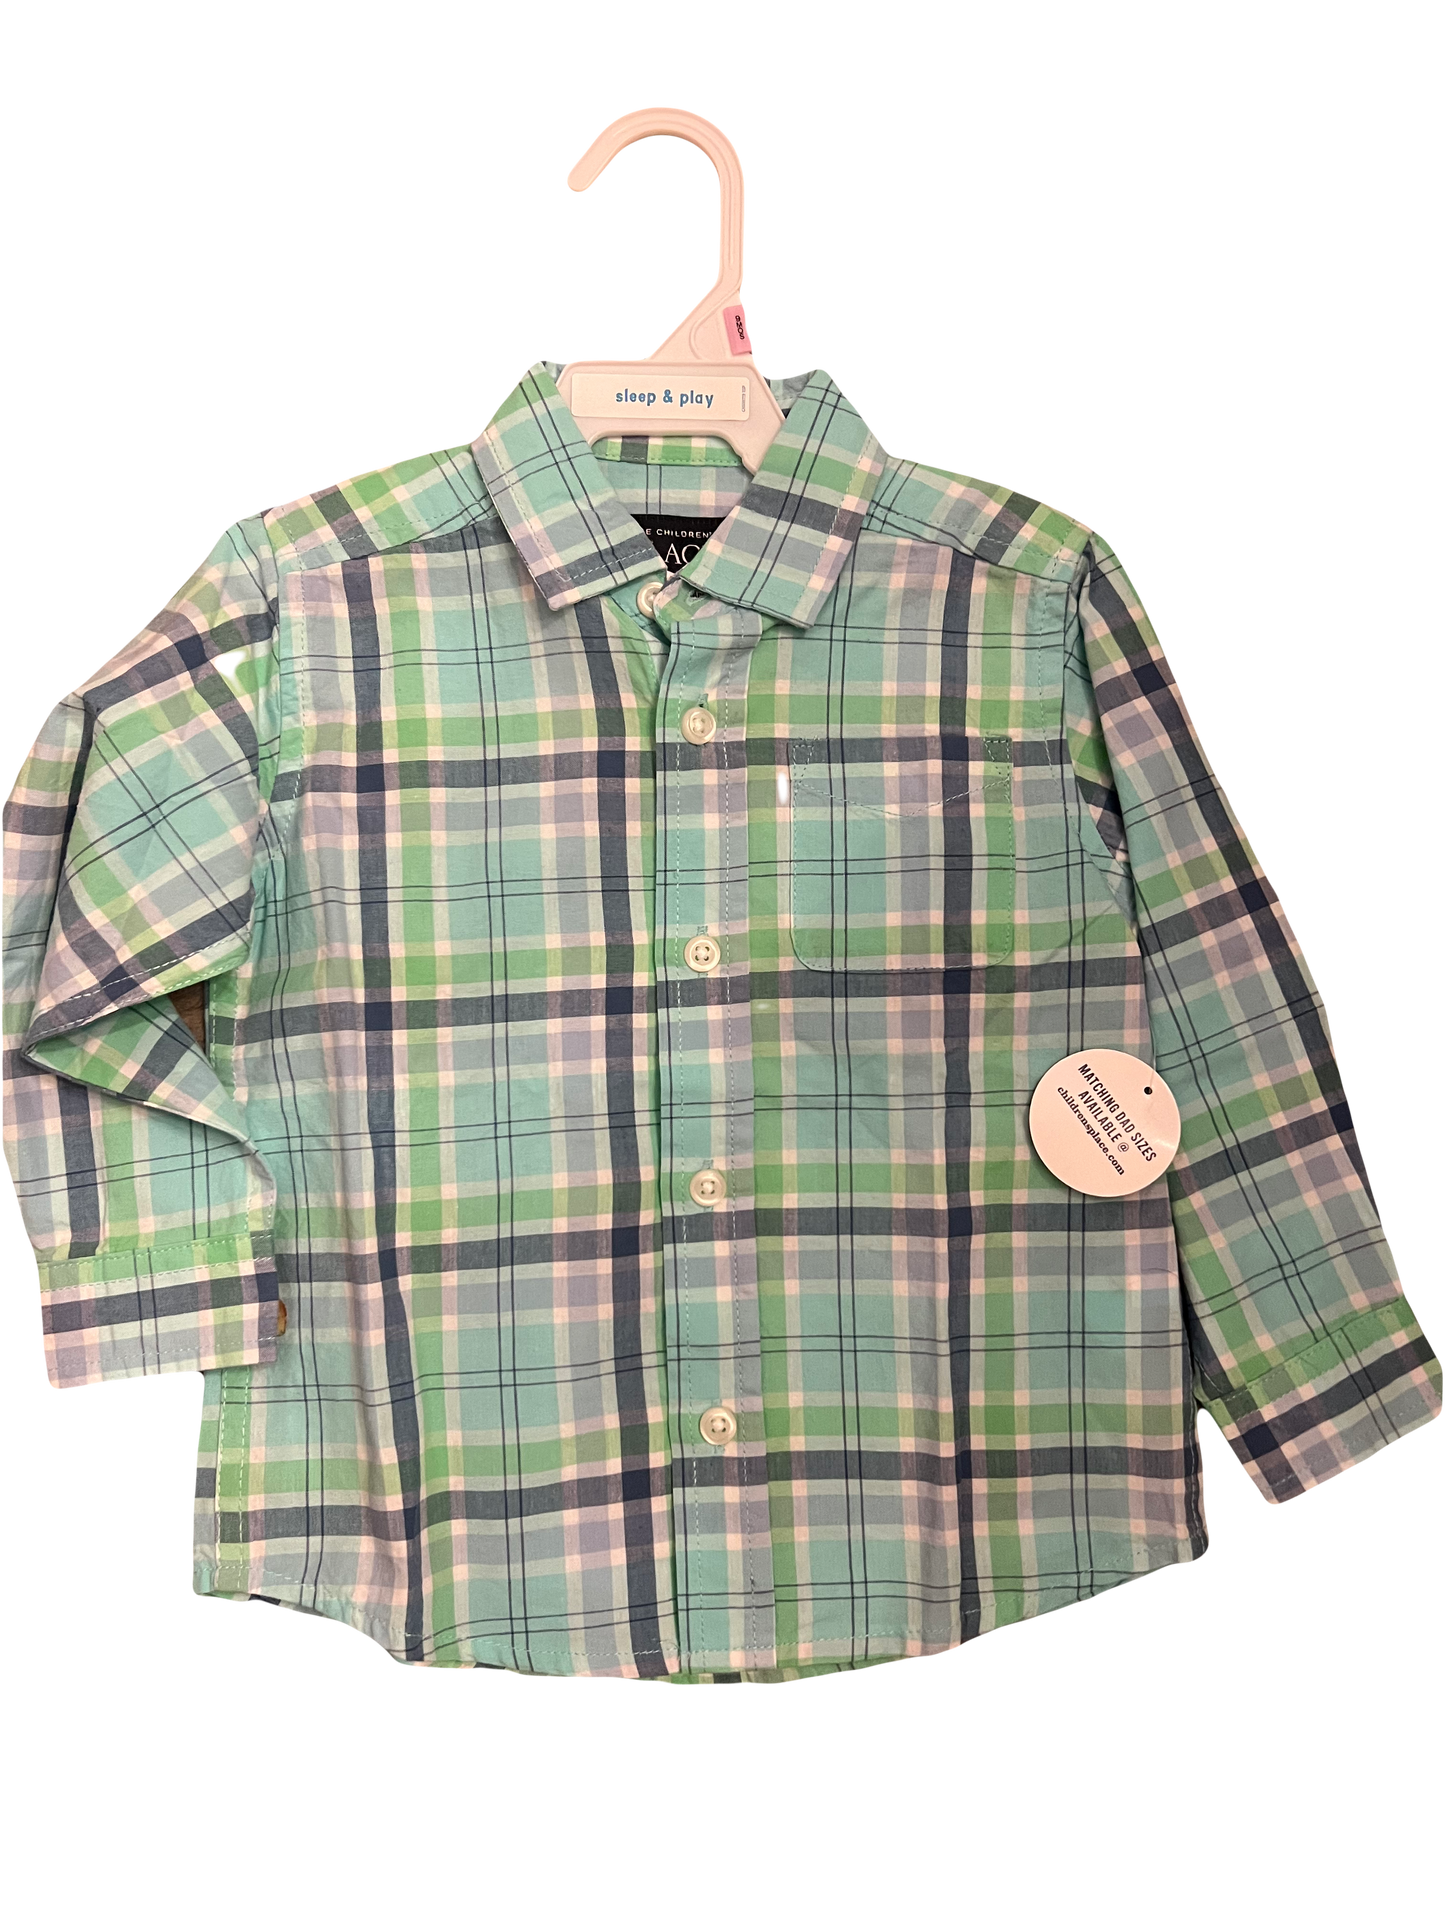 REDUCED NEW UTH TAGS Children’s Place Boy plaid long sleeve oxford aqua blue, green, white (18 months)